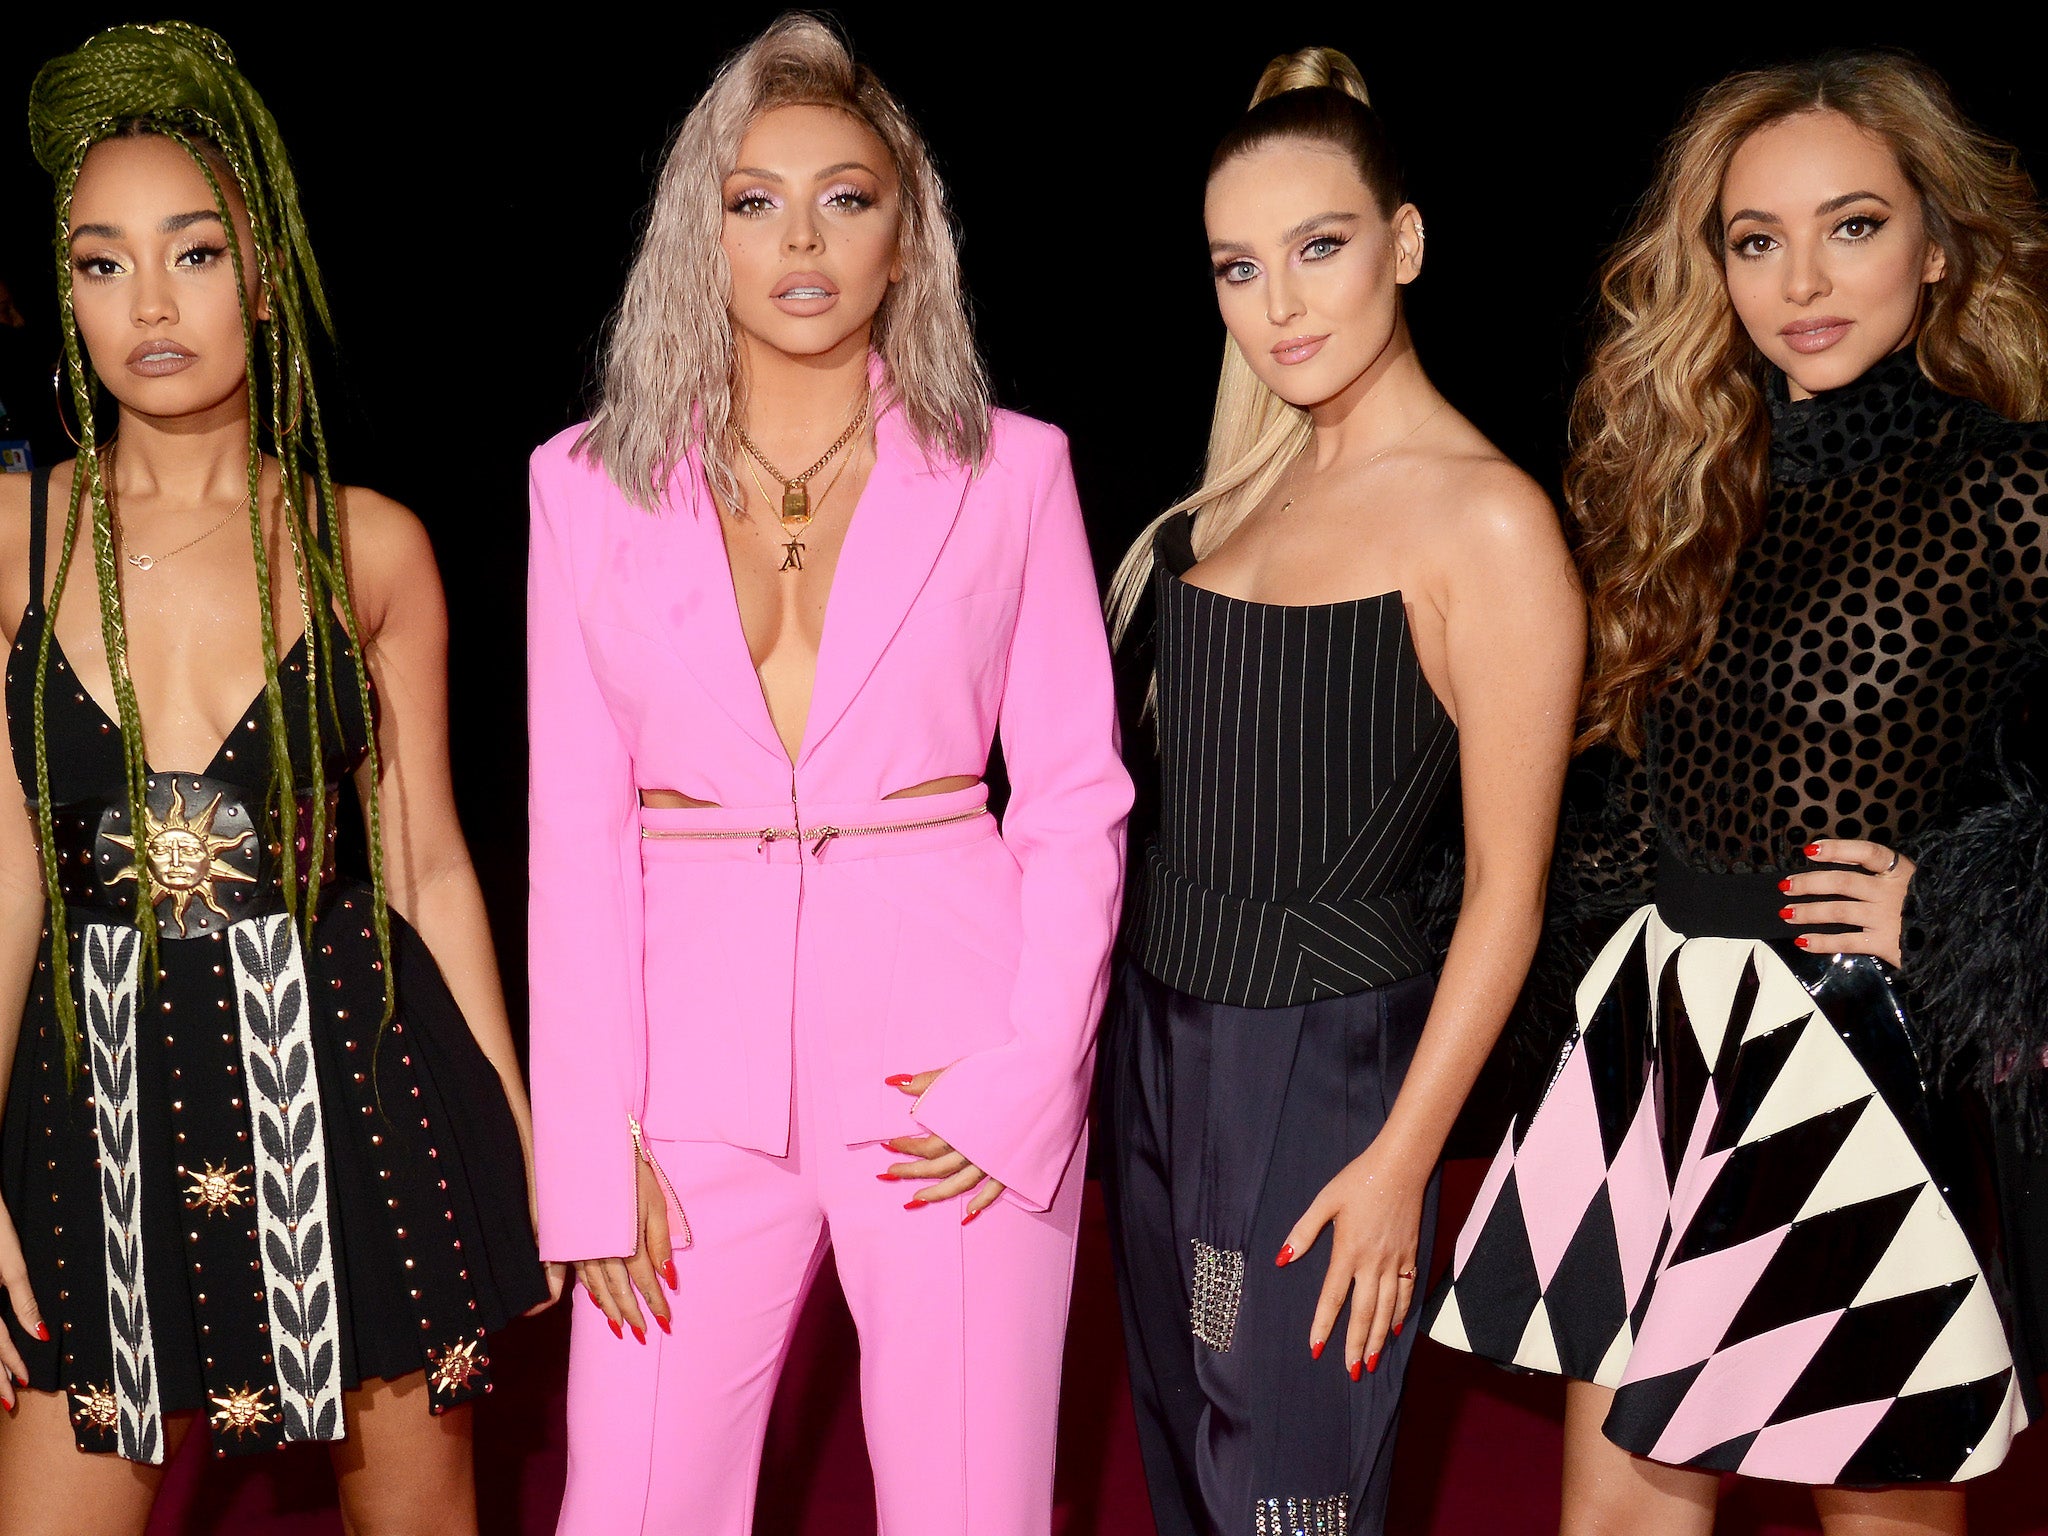 Little Mix were formed on ‘The X Factor’